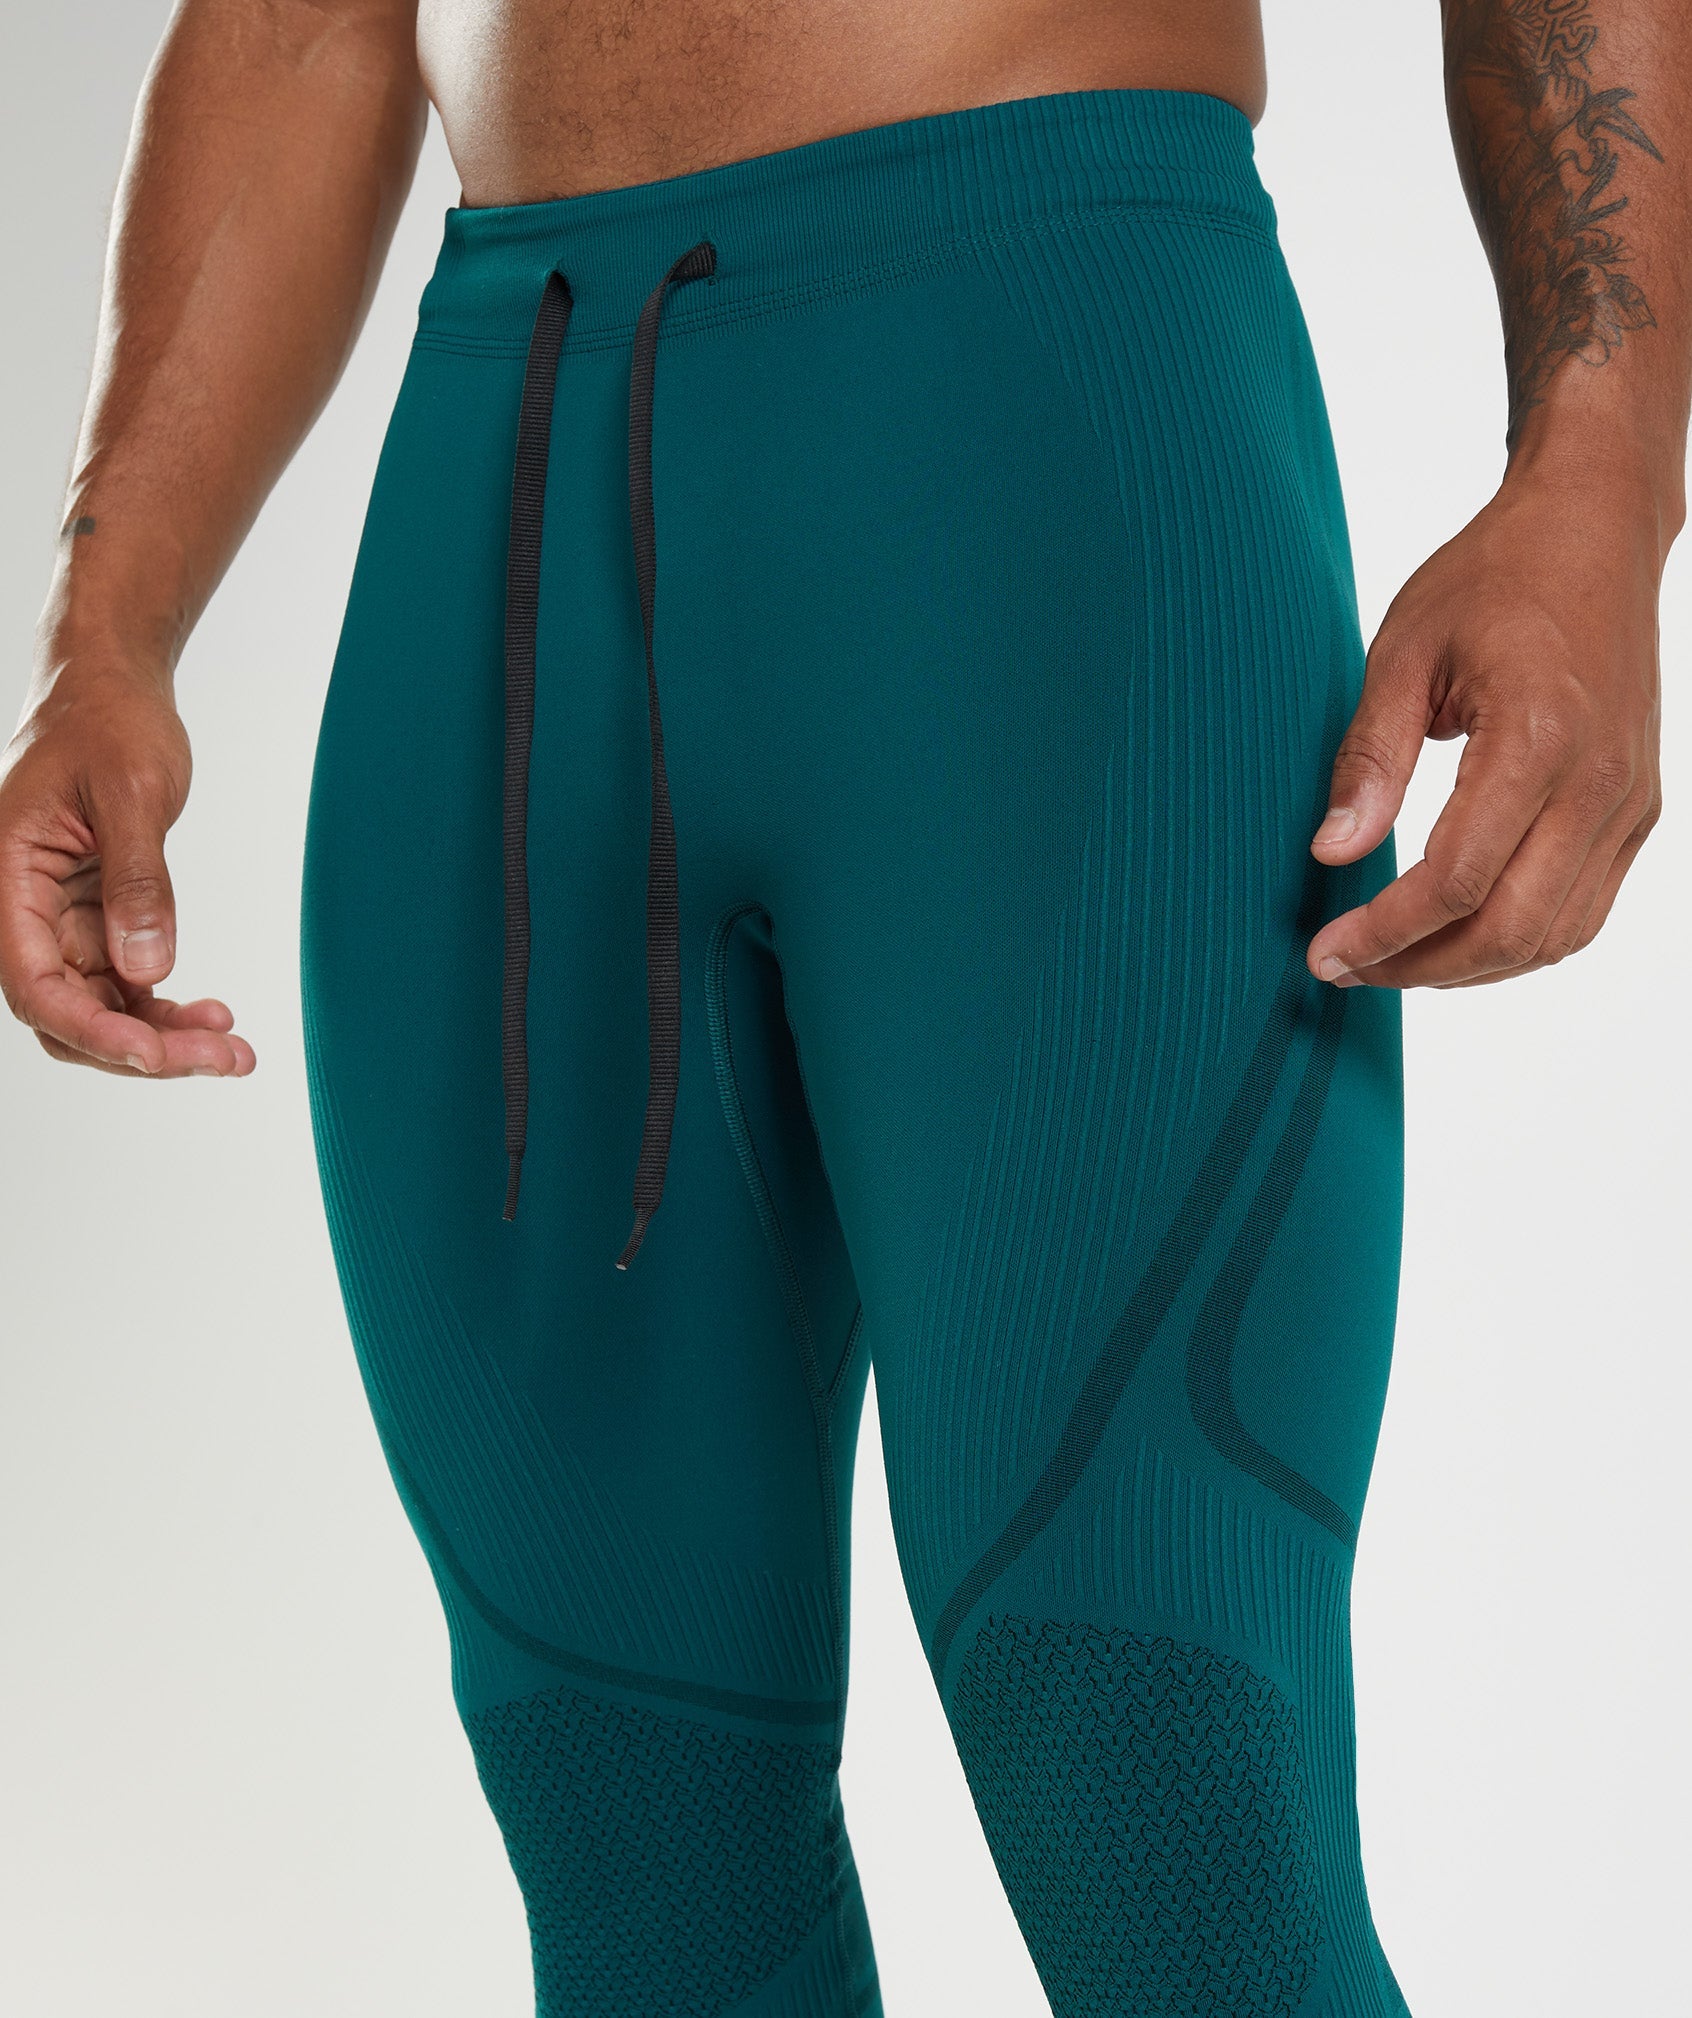 315 Seamless Tights in Winter Teal/Black - view 5